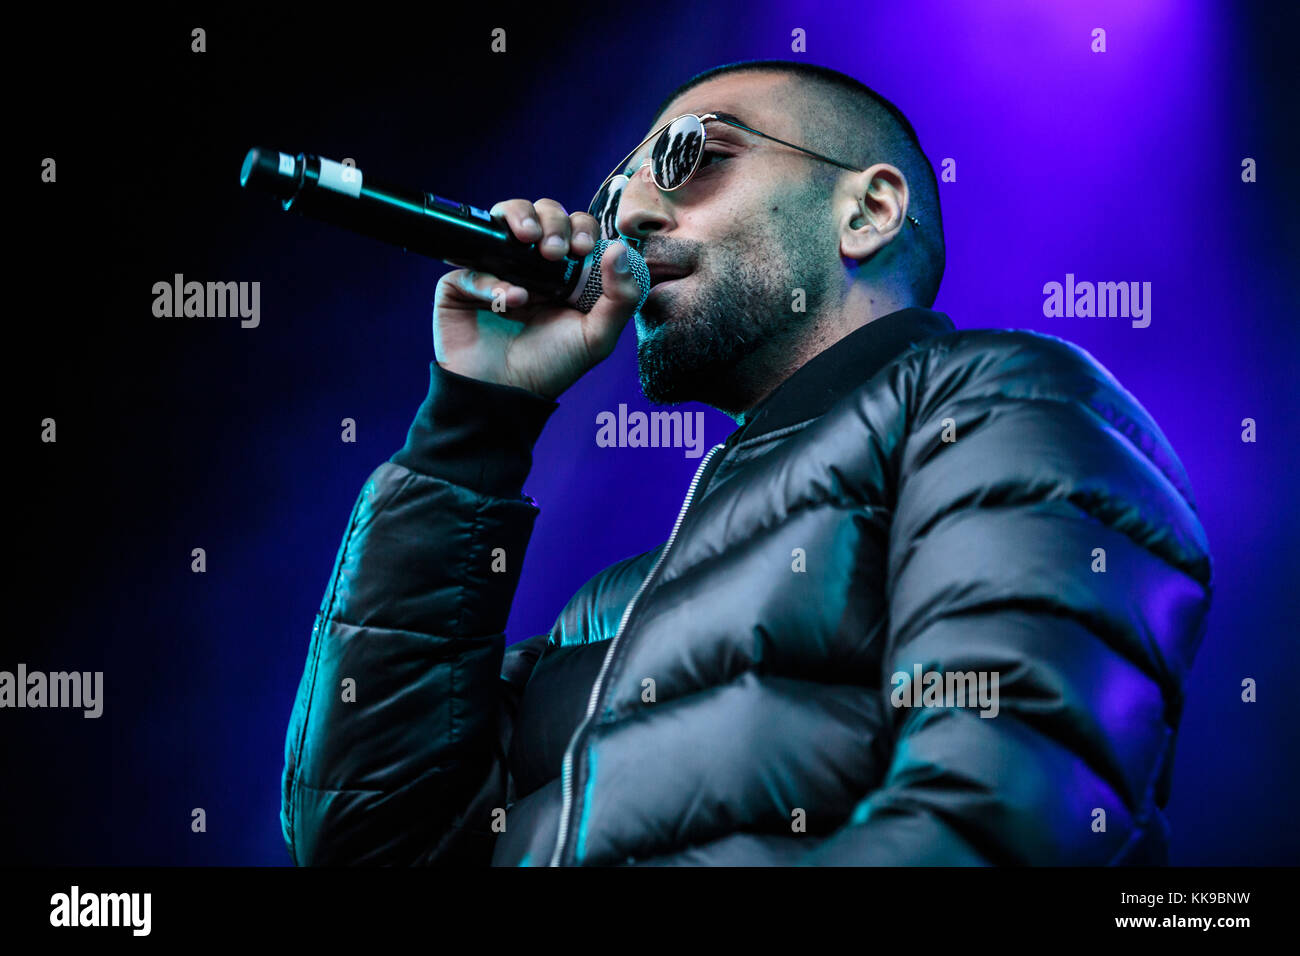 The Danish rapper Sivas (Stylized S!vas) performs a live concert at Bastionen in Bergen. Sivas has an Iranian background and mess up the Danish dictionary combining Danish, English and Arabian in one big ghetto mixture. Norway, 28/08 2015. Stock Photo